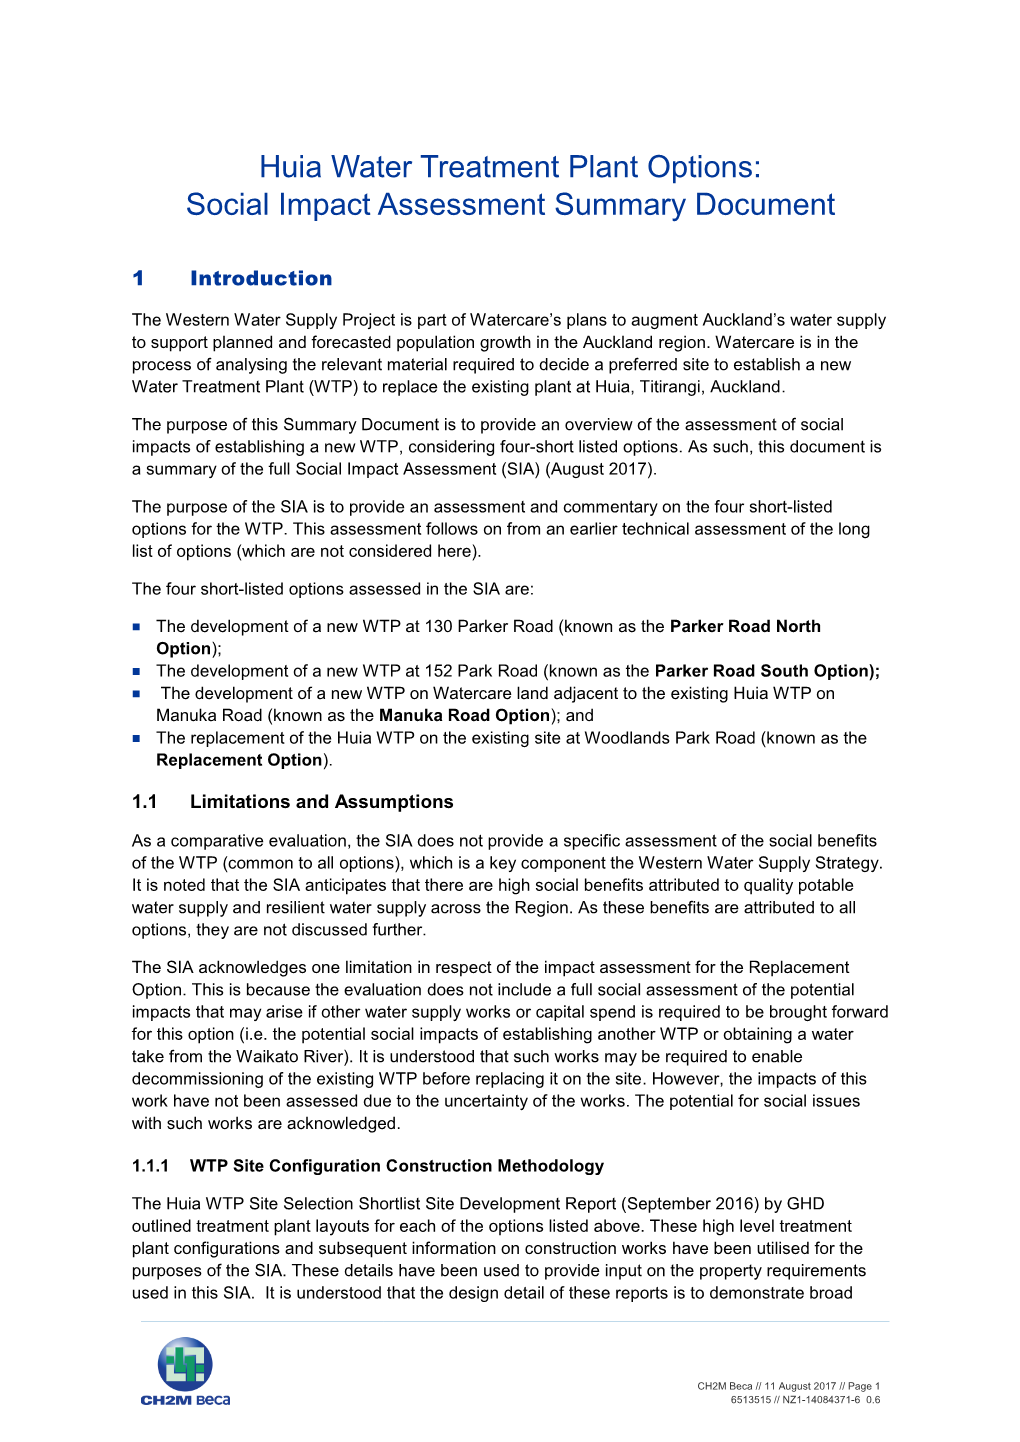 Huia Water Treatment Plant Options: Social Impact Assessment Summary Document